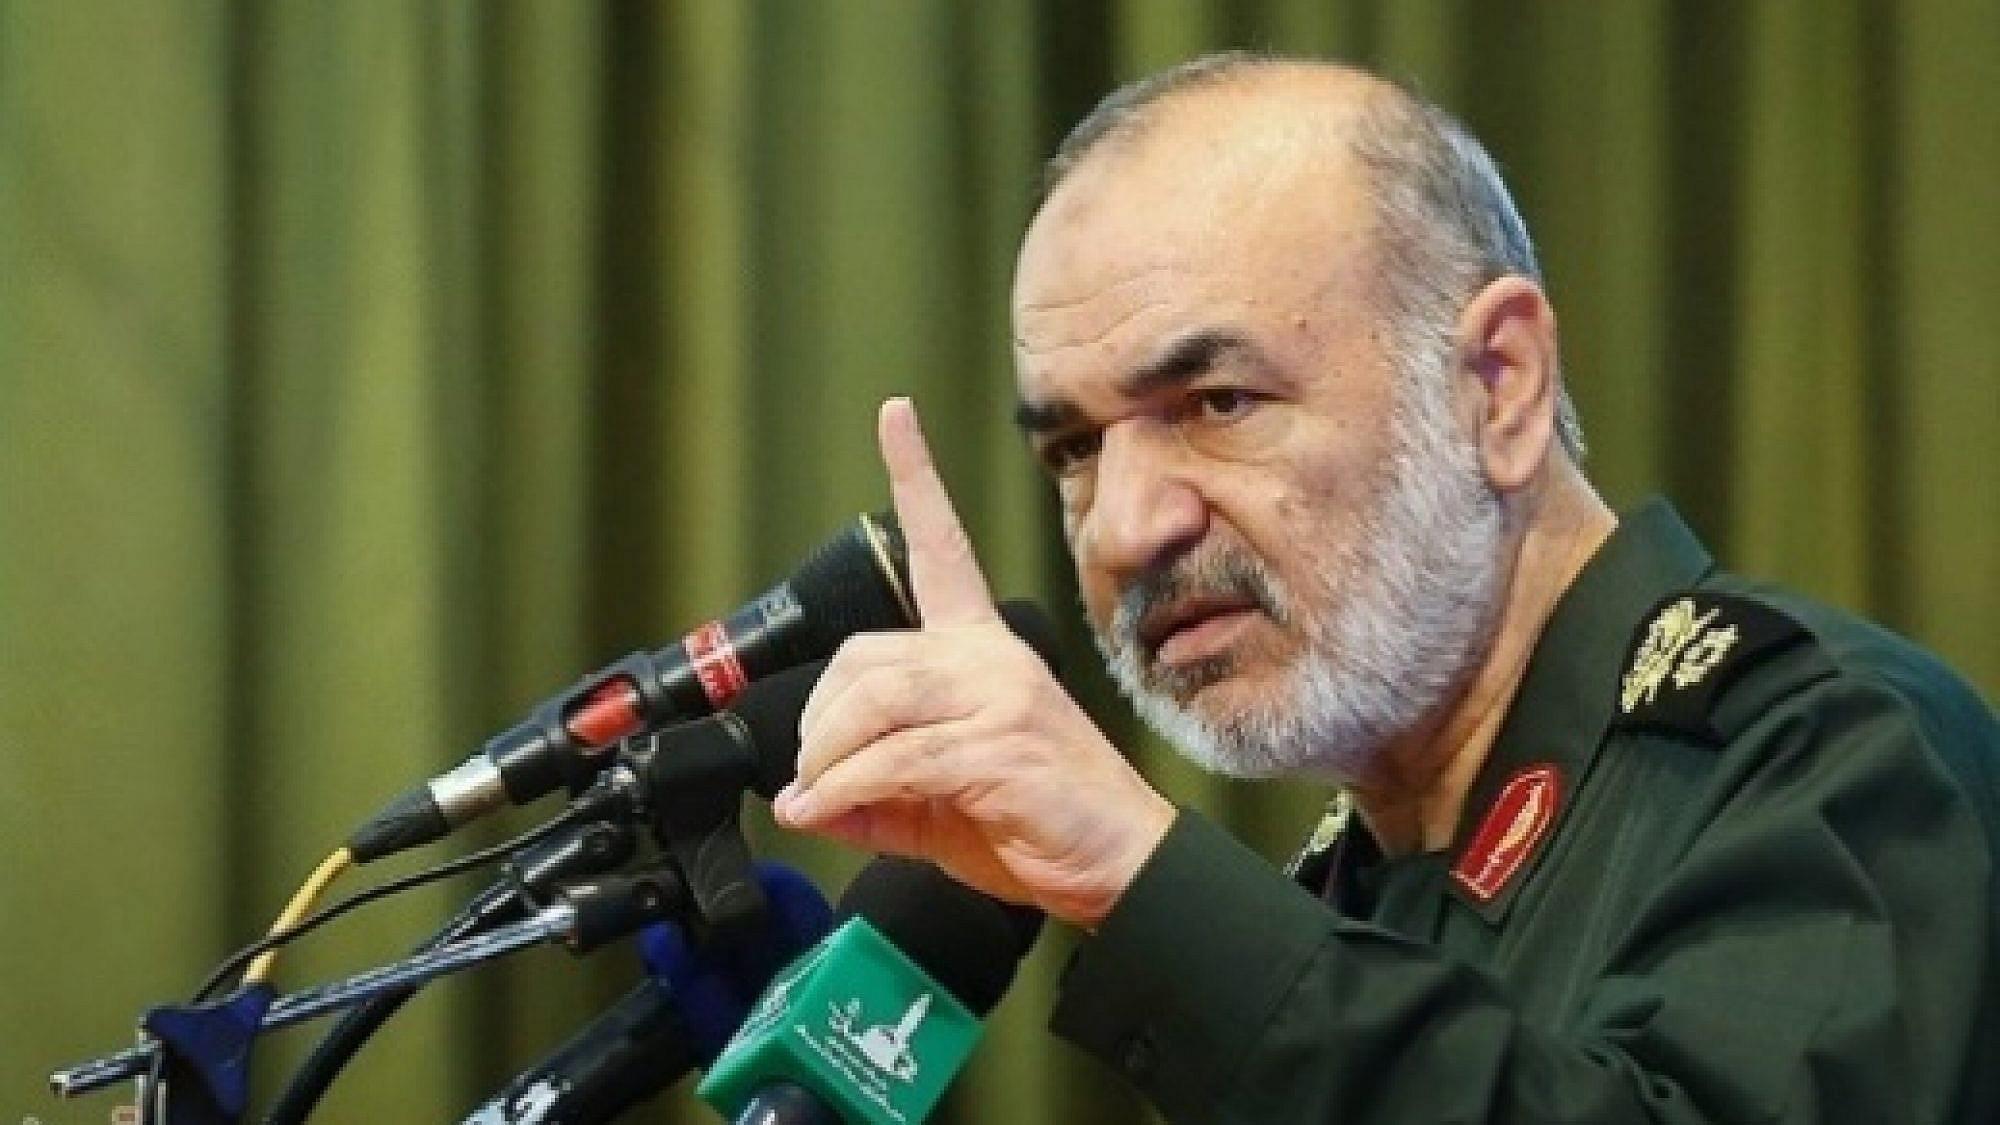 ifmat - IRGC commander-in-chief says US is incapable of waging war against Iran